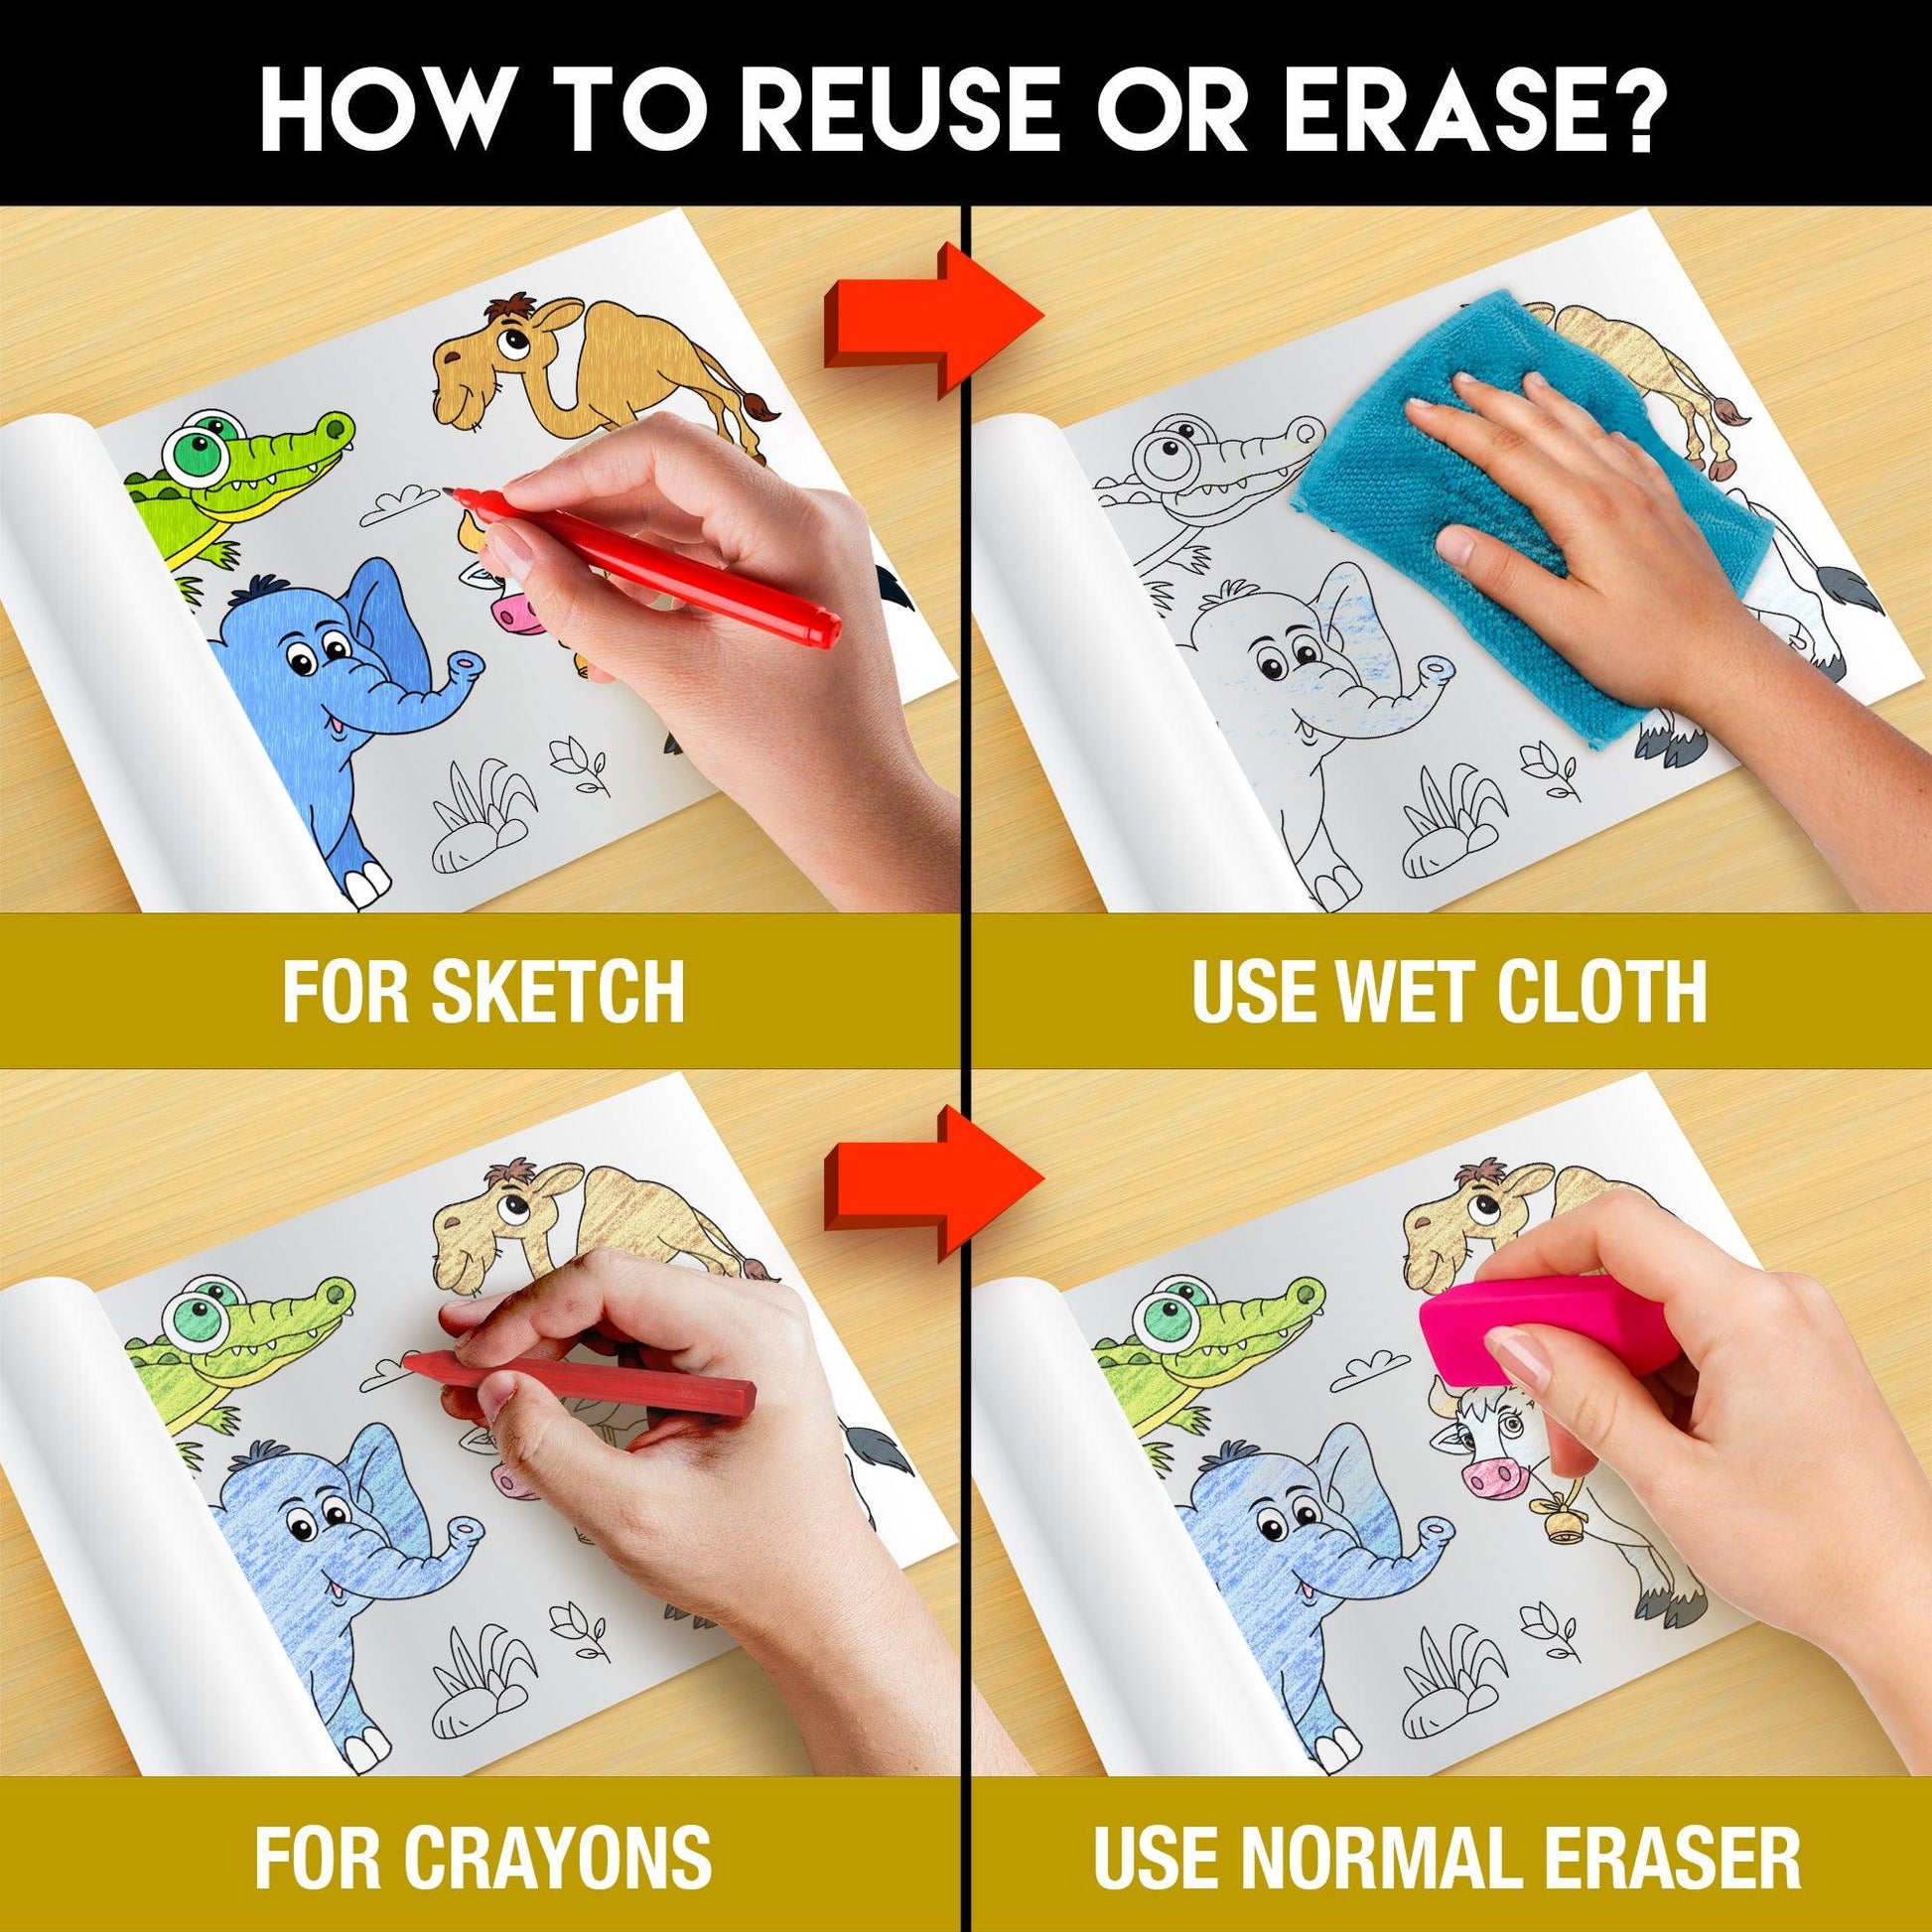 The image has a yellow background with four pictures demonstrating how to reuse or erase: the first picture depicts sketching on the sheet, the second shows using a wet cloth to remove sketches, the third image displays crayons colouring on the sheet, and the fourth image illustrates erasing crayons with a regular eraser